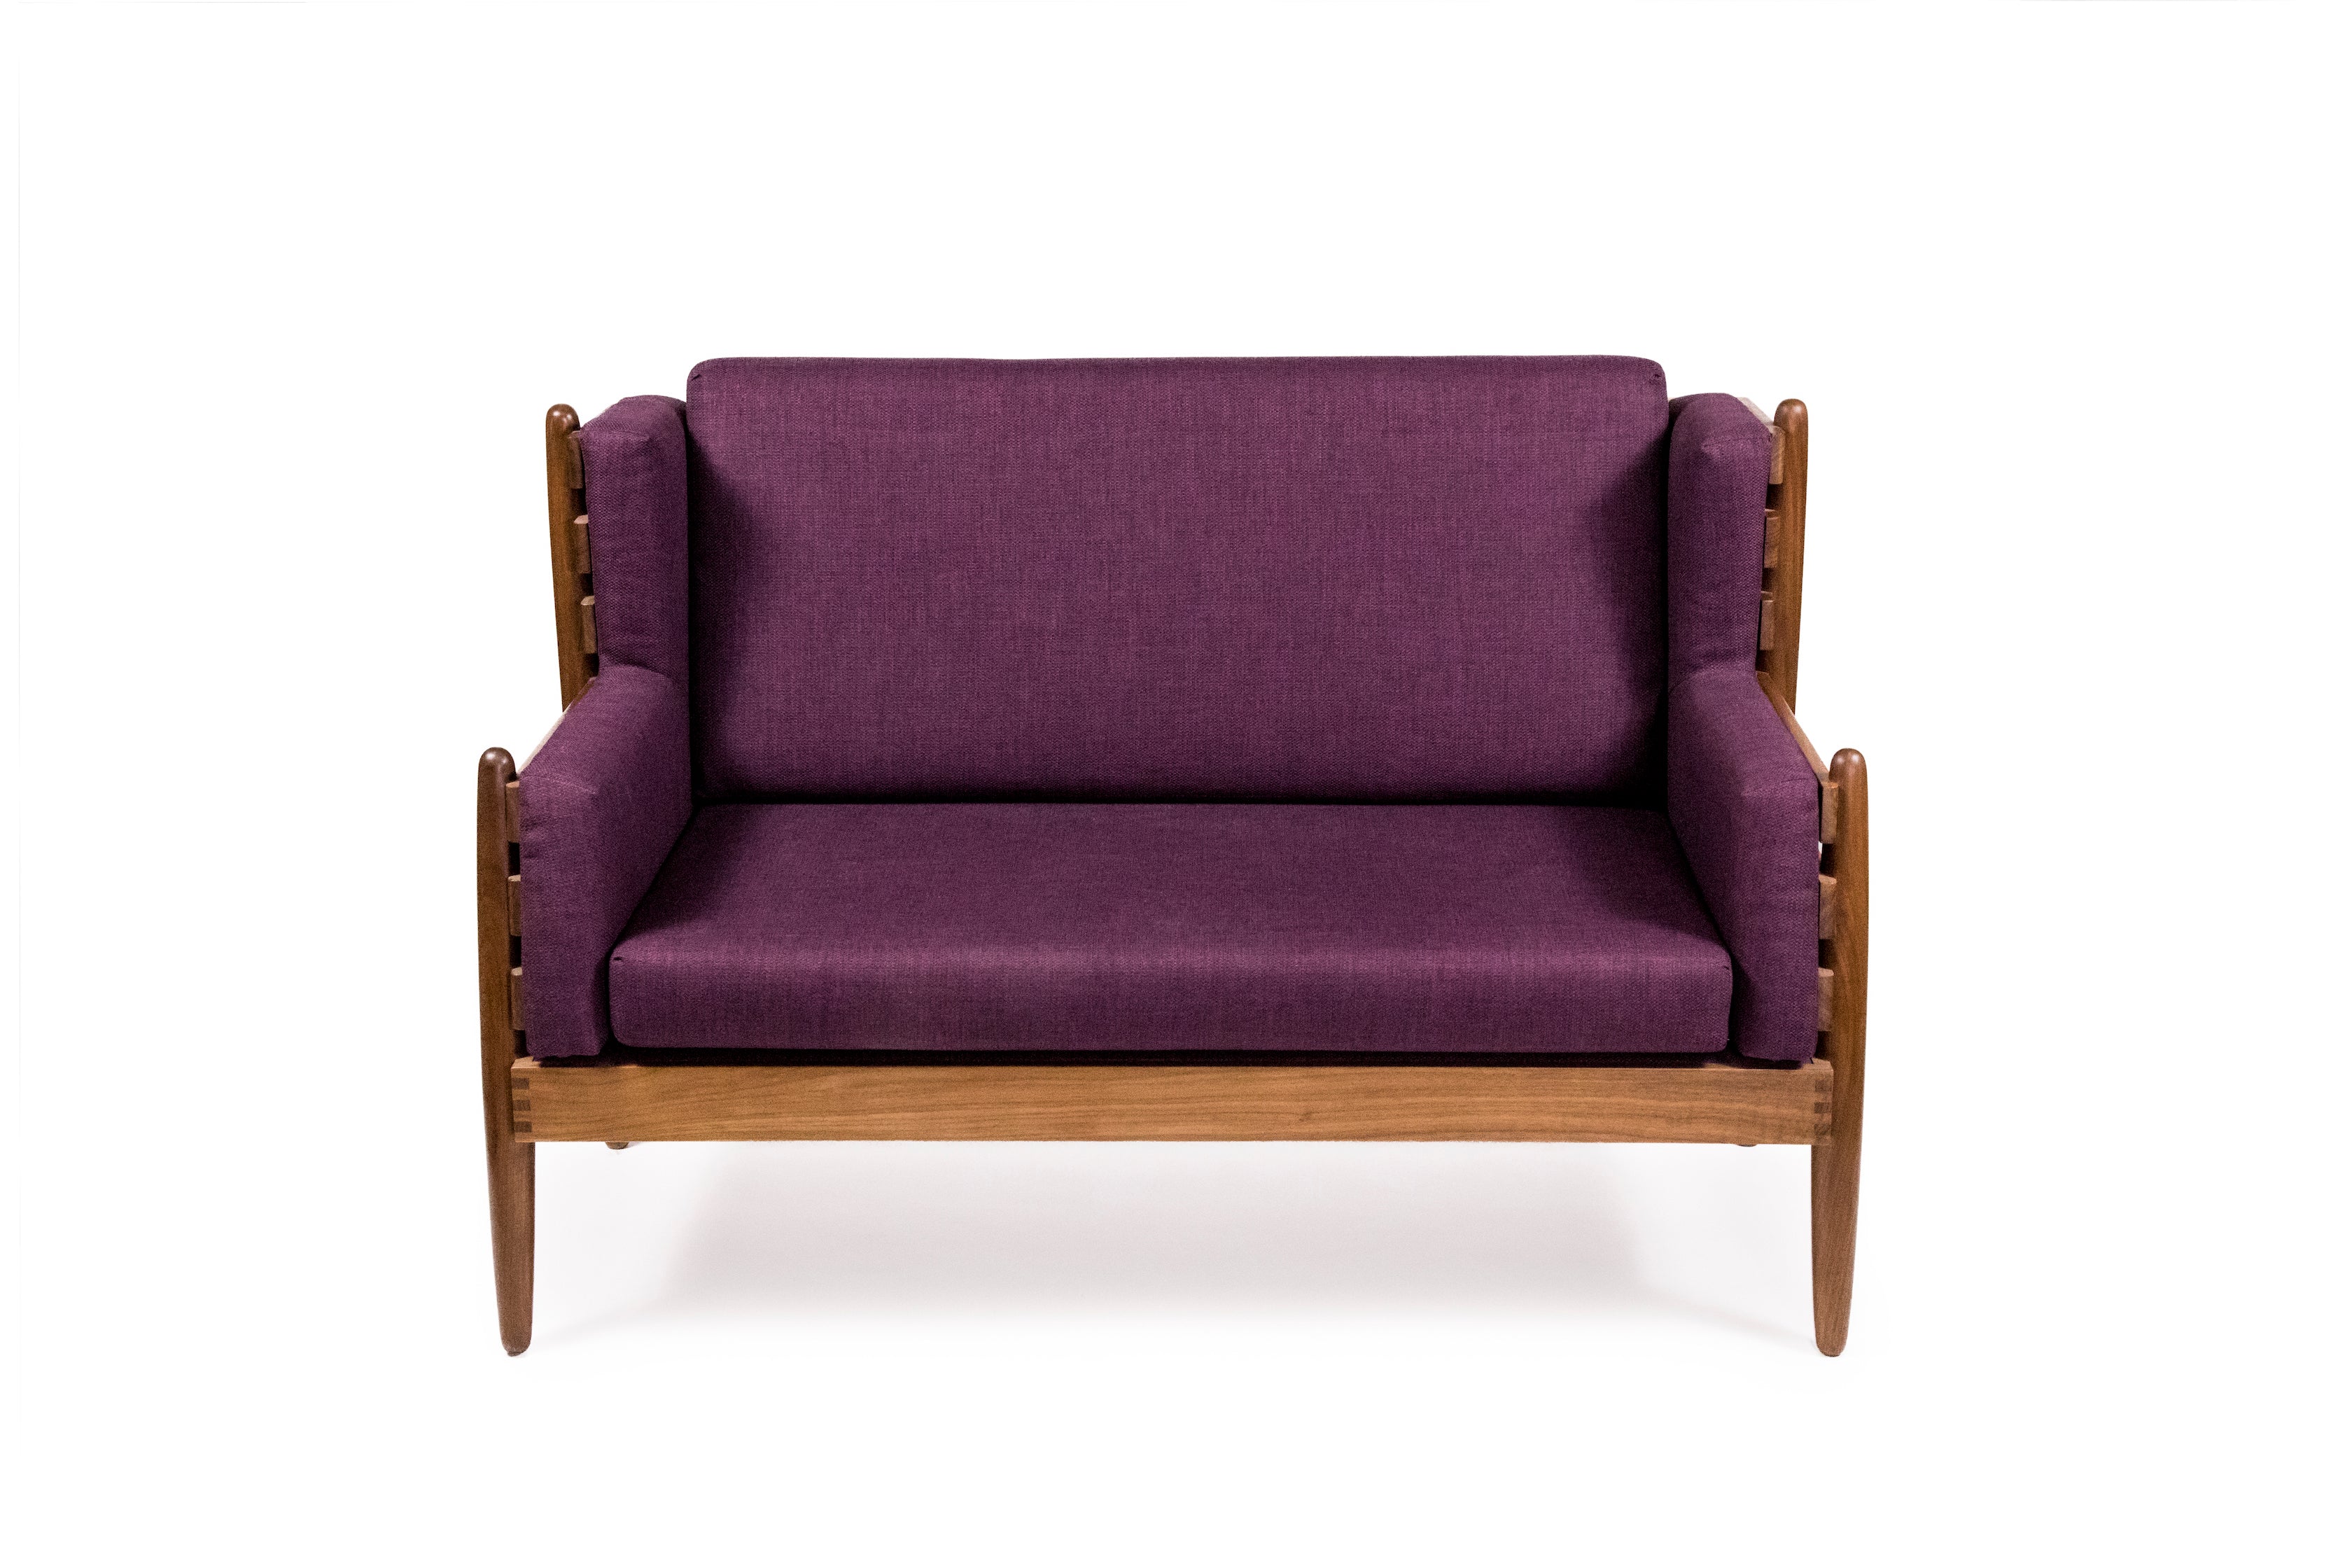 Wright Compact midcentury modern Sofa handcrafted by Hunt & Noyer in Michigan